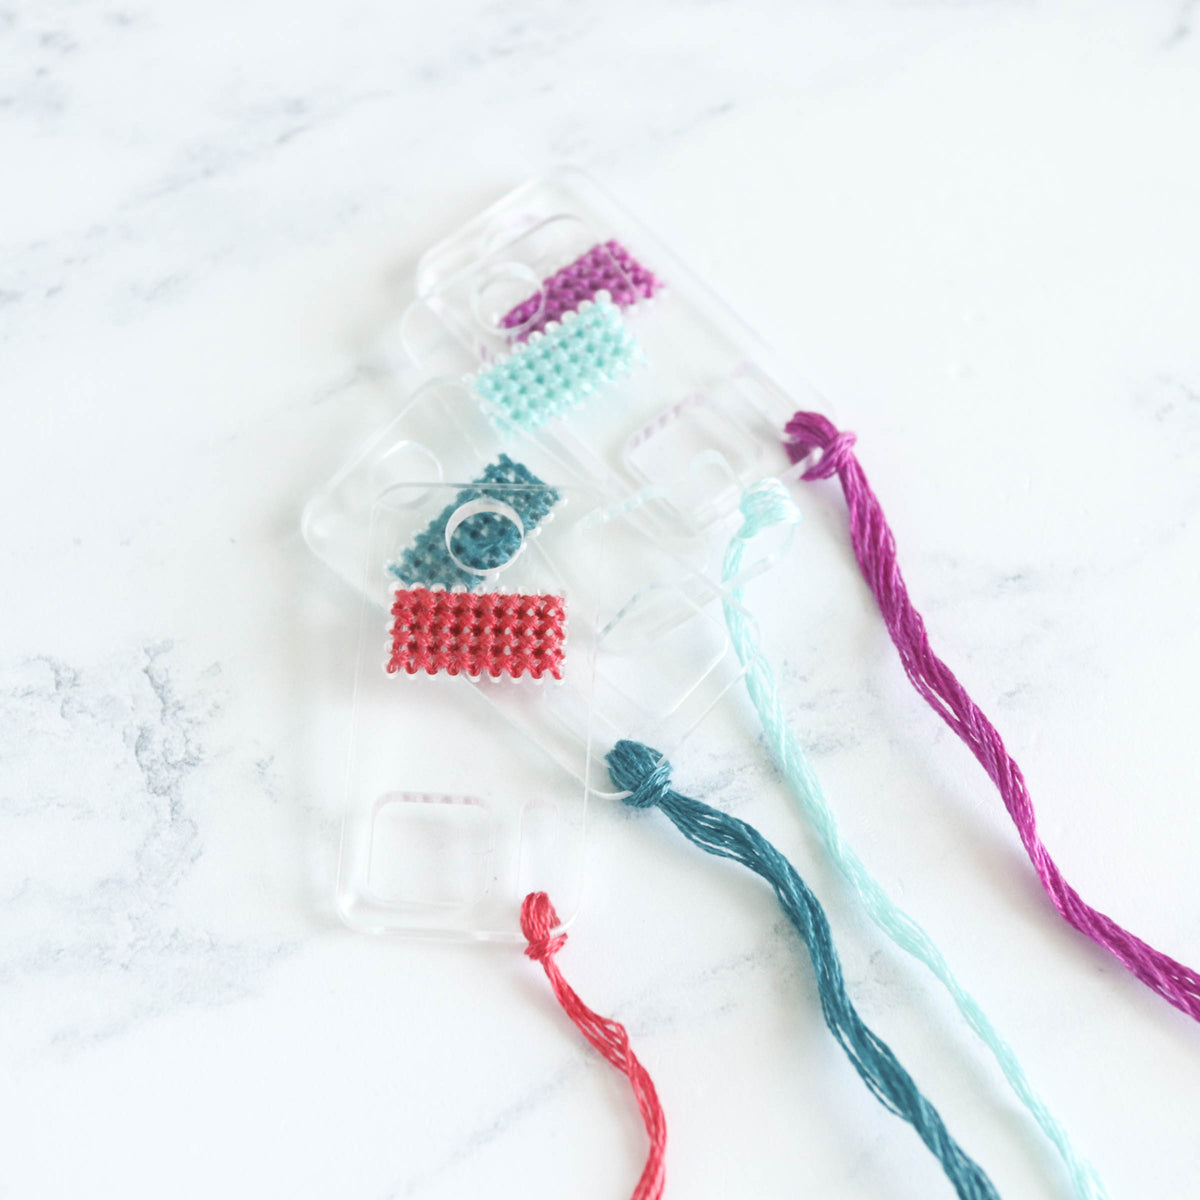 Embroidery Floss Swatch Drops